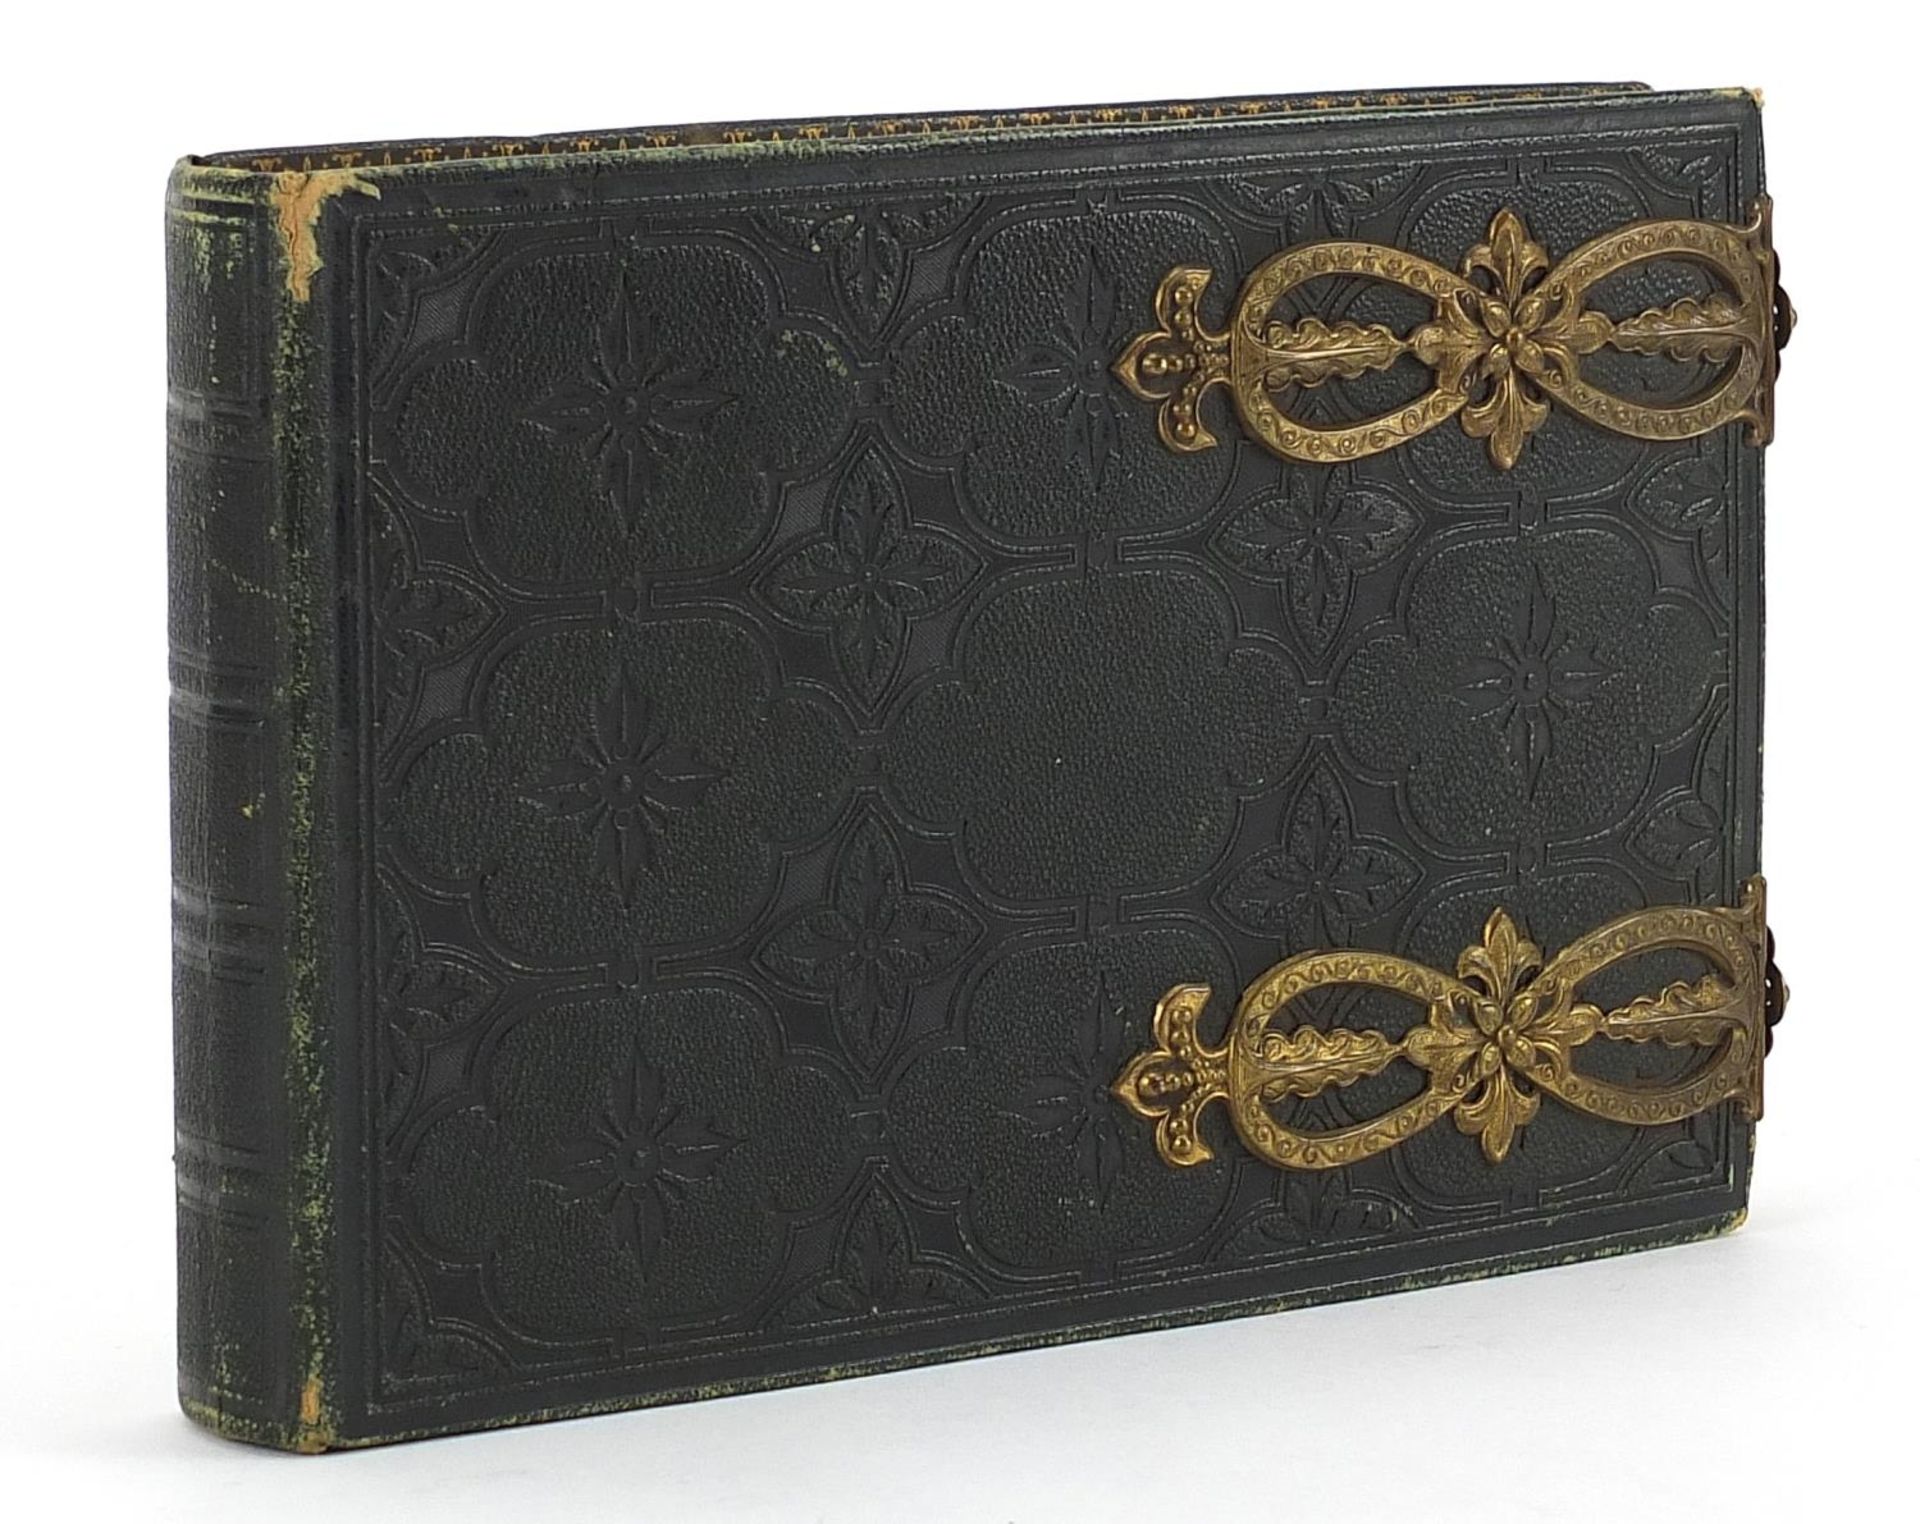 Collection of black and white cabinet cards and greetings cards arranged in a tooled leather album